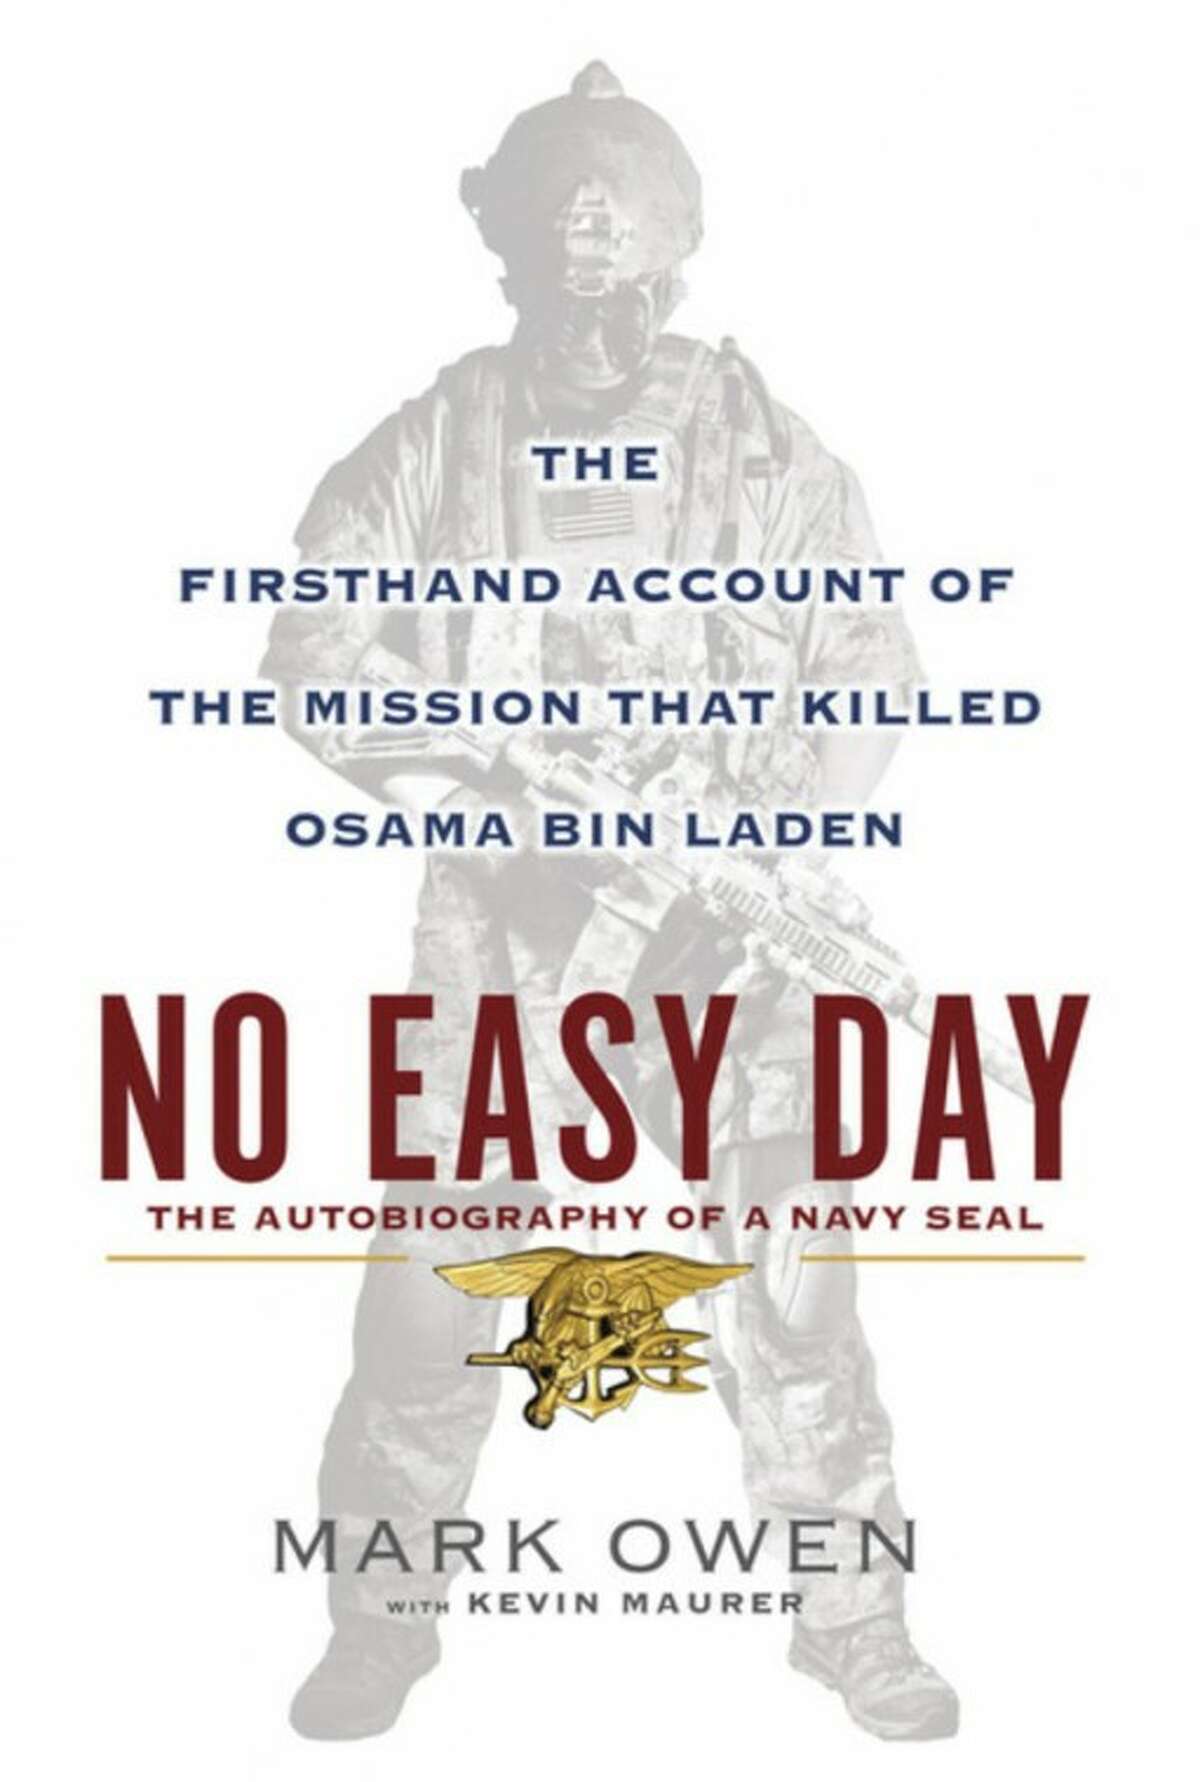 FILE - This book cover image released by Dutton shows "No Easy Day: The Firsthand Account of the Mission that Killed Osama Bin Laden," by Mark Owen with Kevin Maurer. The firsthand account of the Navy SEAL raid that killed Osama bin Laden contradicts previous accounts by administration officials, raising questions as to whether the terror mastermind presented a clear threat when SEALs first fired upon him. (AP Photo/Dutton, File)